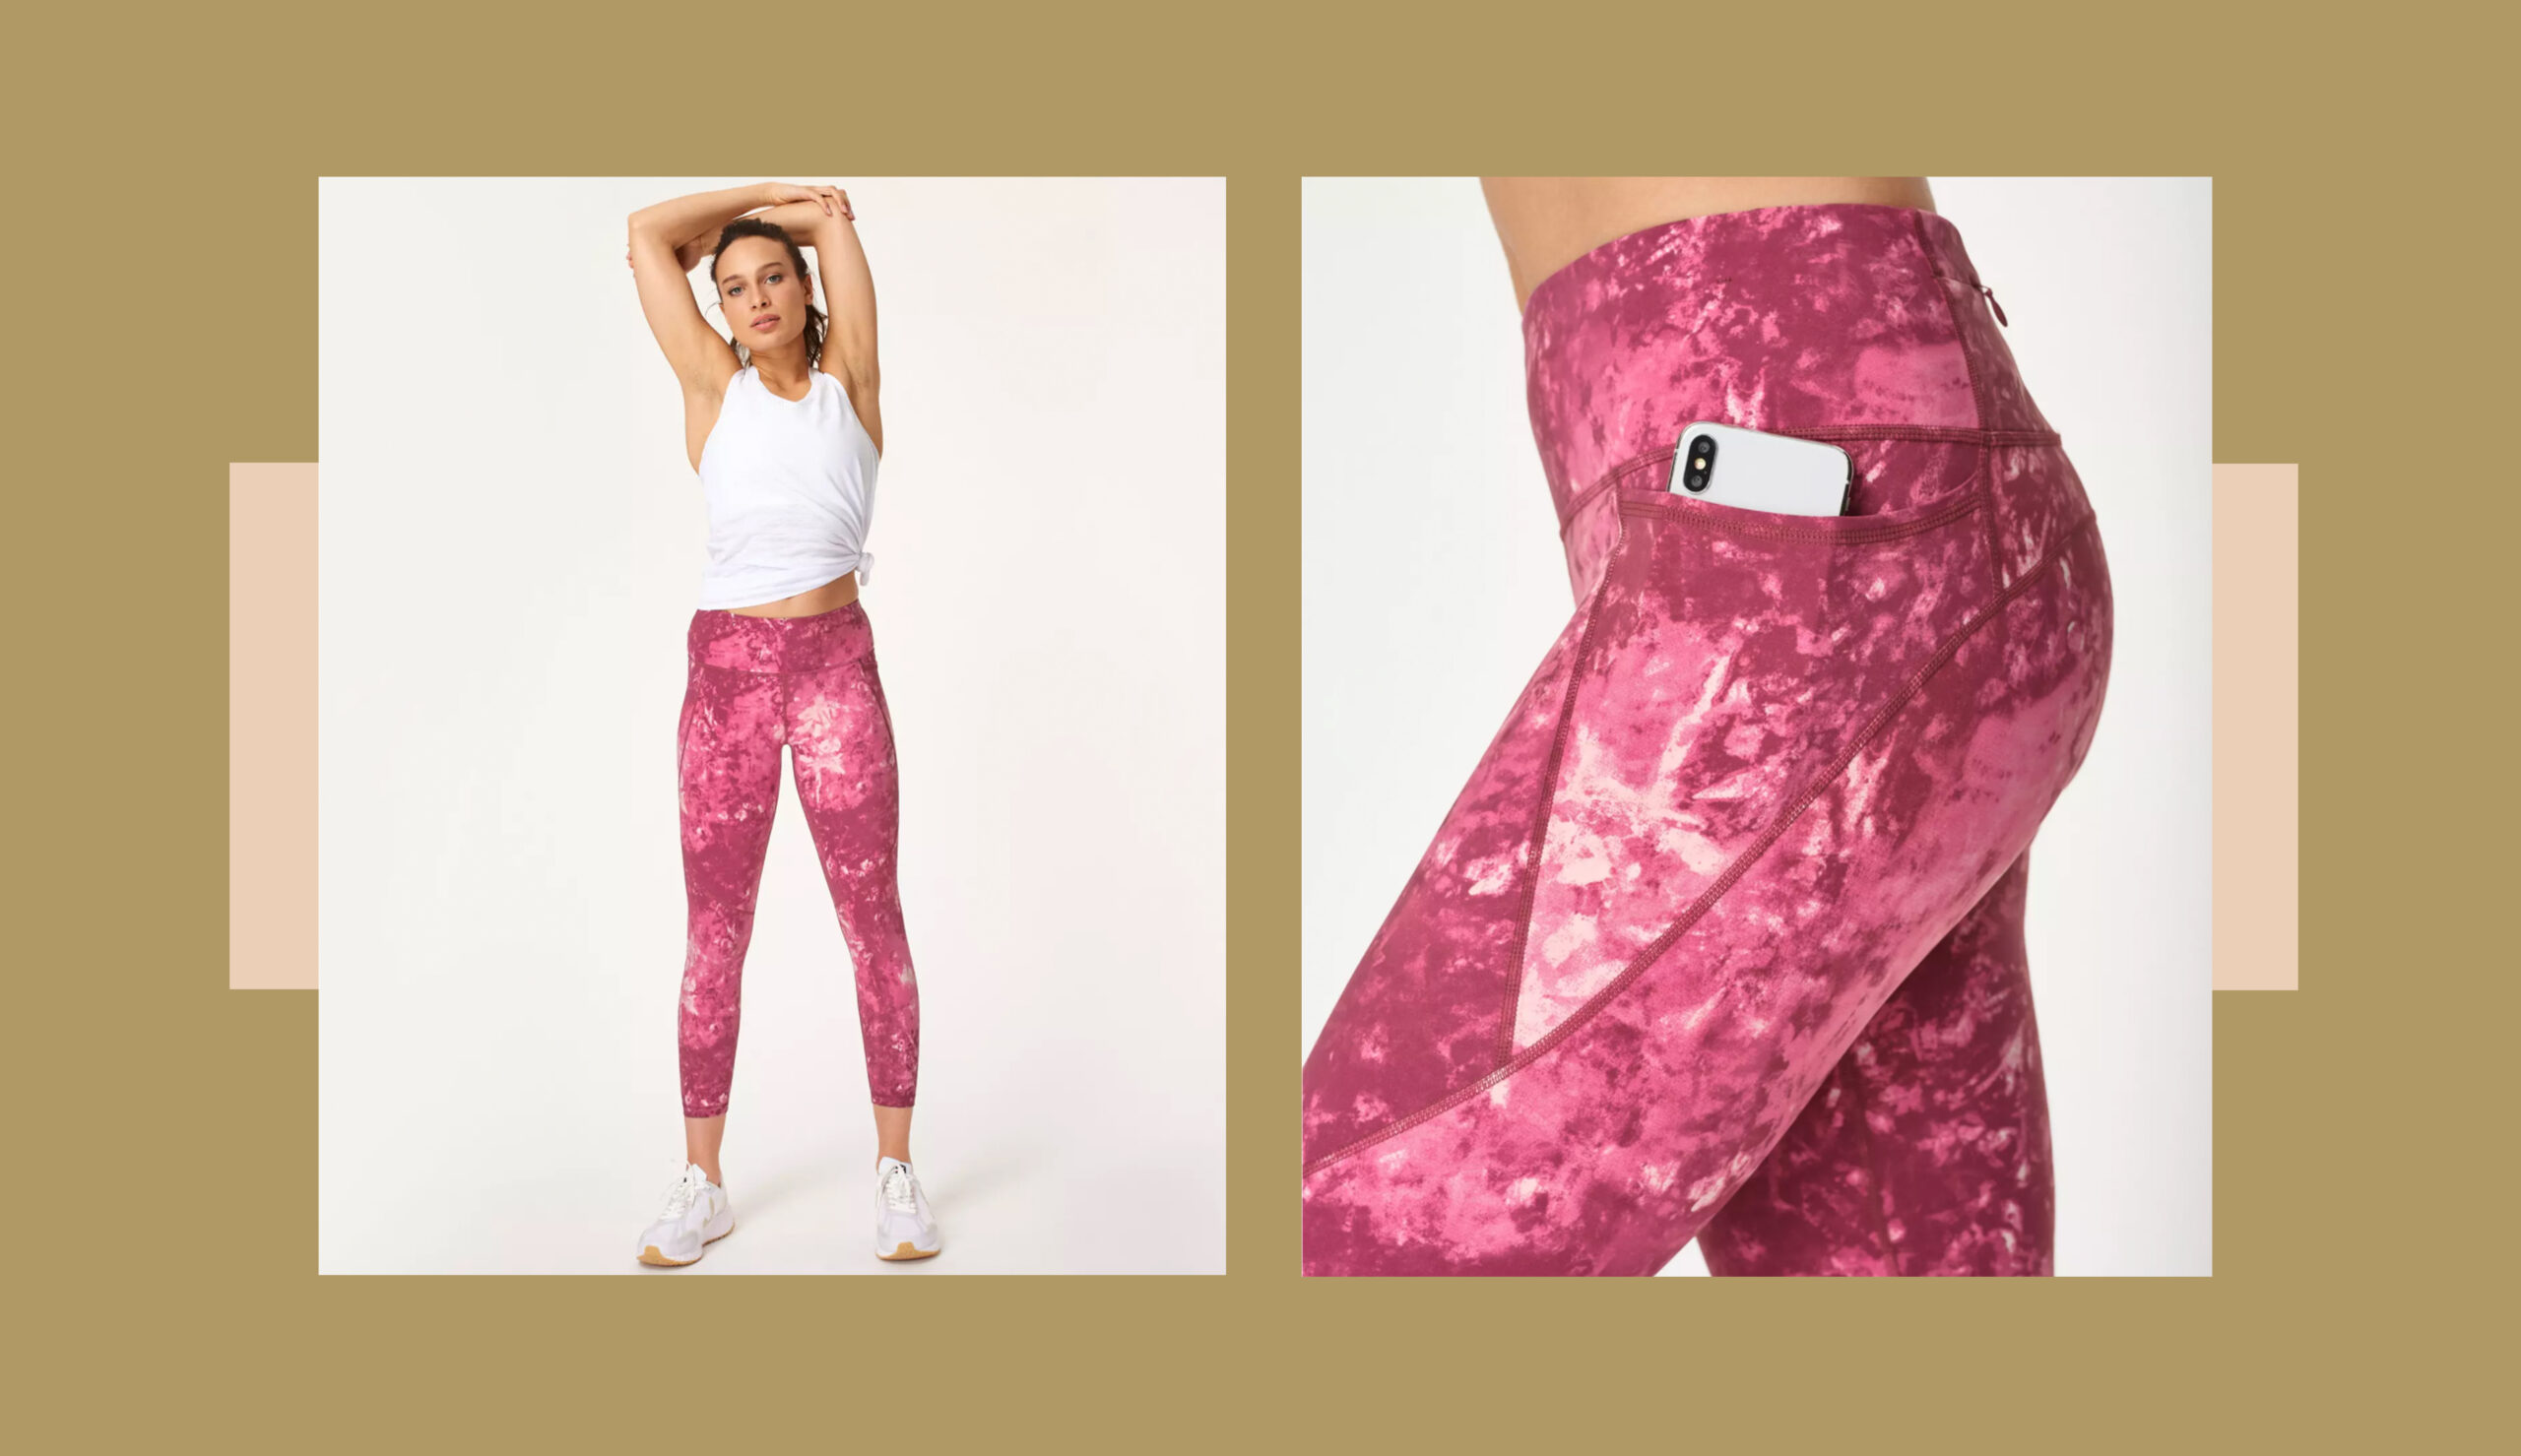 The math is 100% mathing when Sweaty Betty Power Leggings are